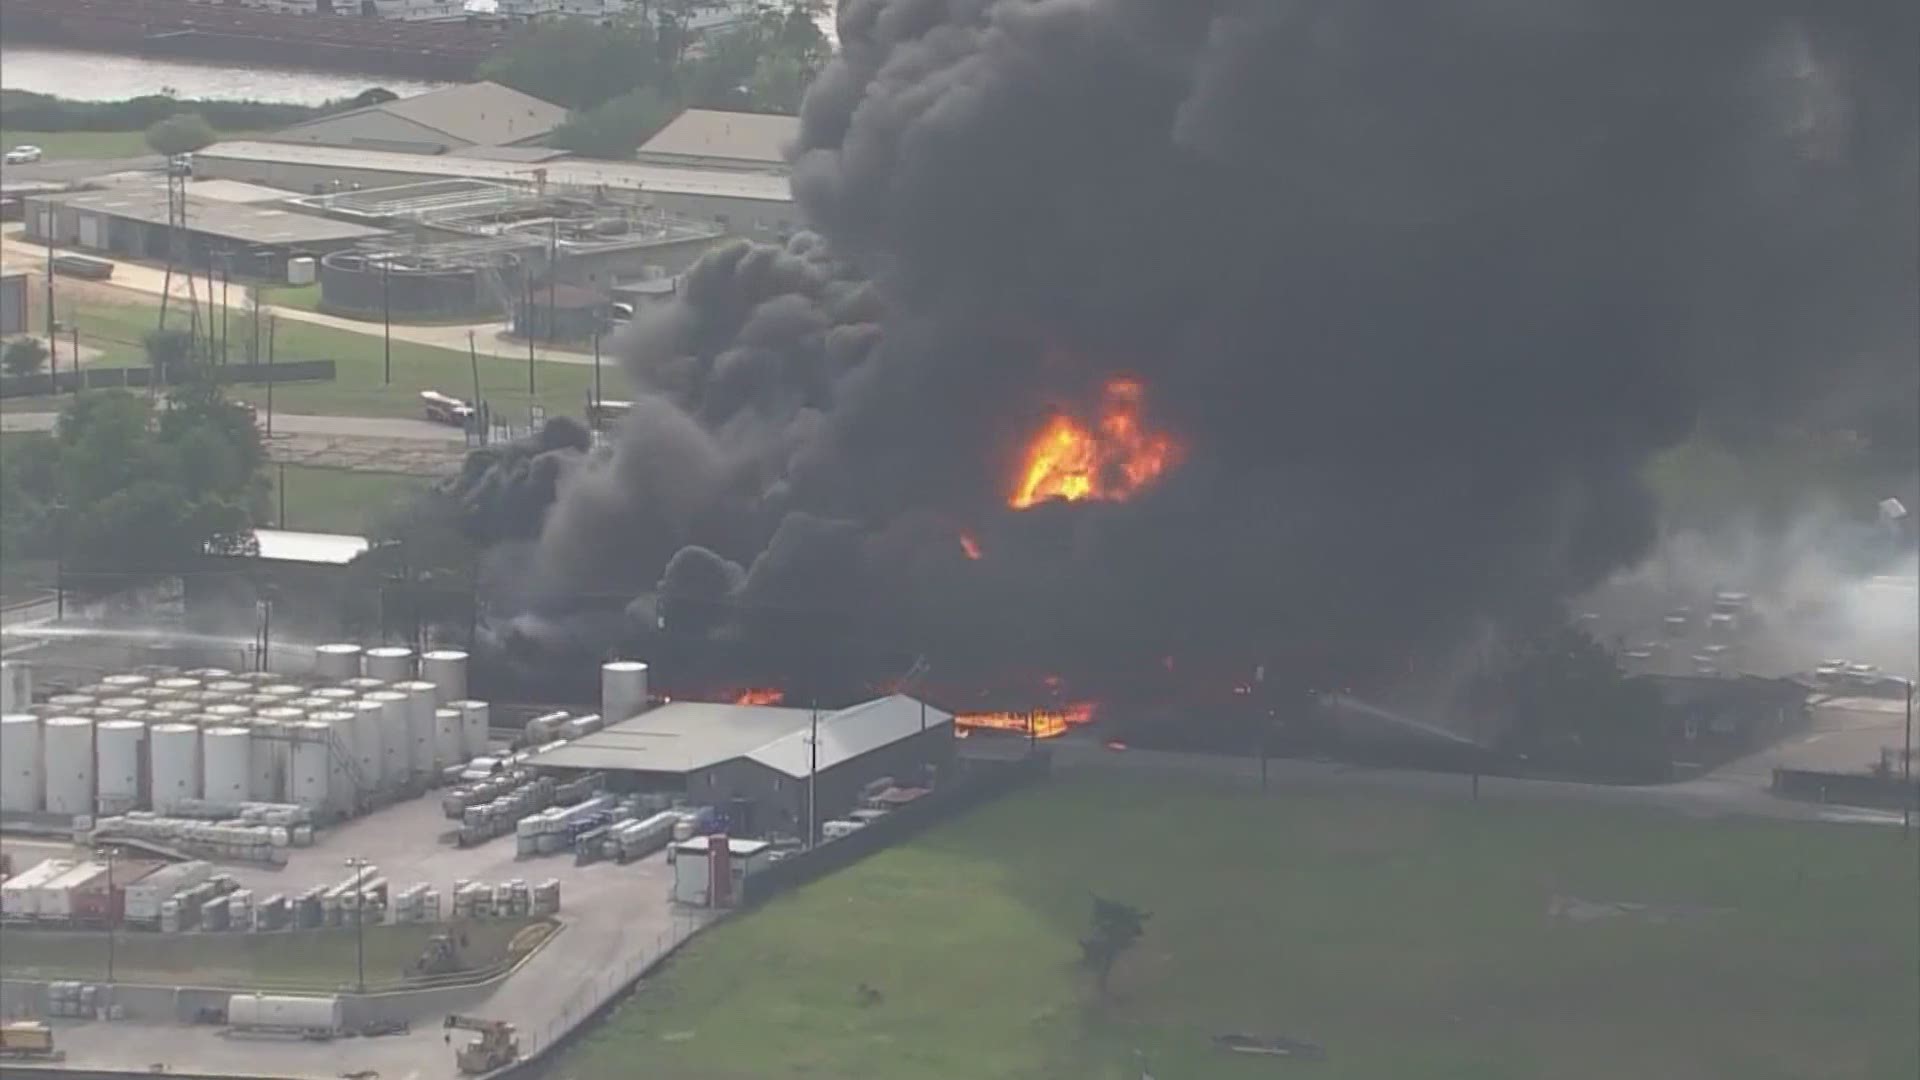 Investigators are still trying to determine what caused a large fire at K-Solv chemical industrial facility in Channelview. Fortunately, no one was seriously injured